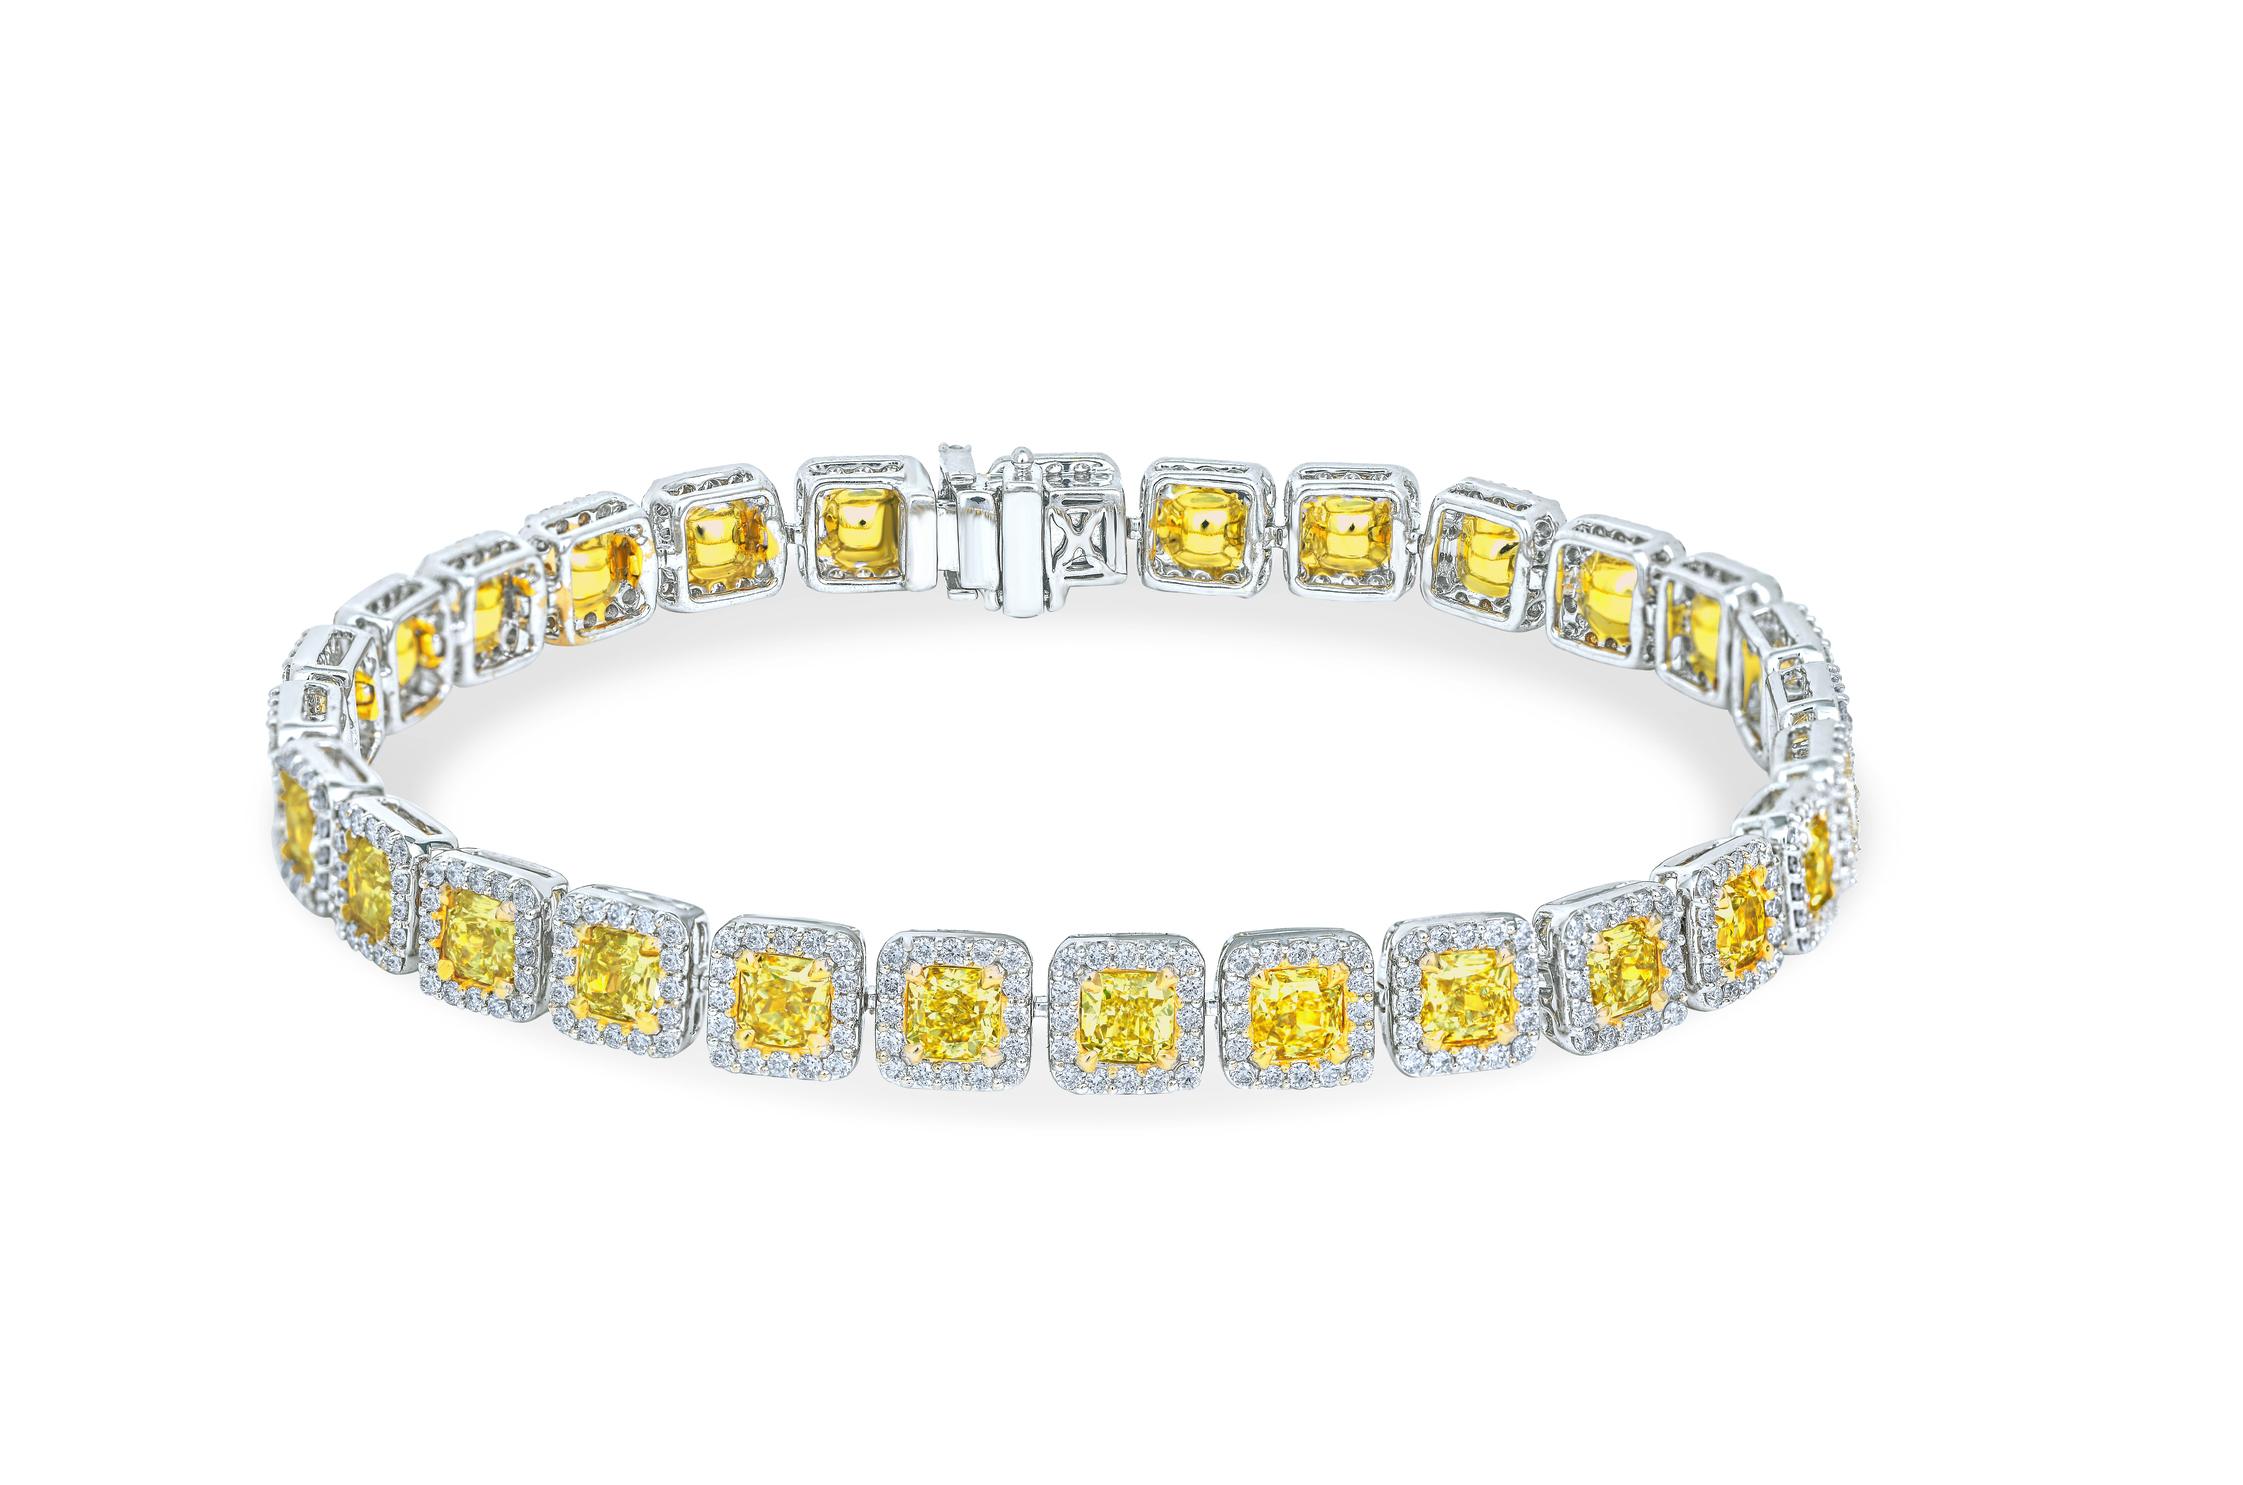 A breathtaking contemporary tennis bracelet made up of natural yellow diamonds and colorless diamonds. Perfectly matched radiant yellow diamonds are mounted with a halo of white diamonds surround each of them. Calibrated to perfection in a straight